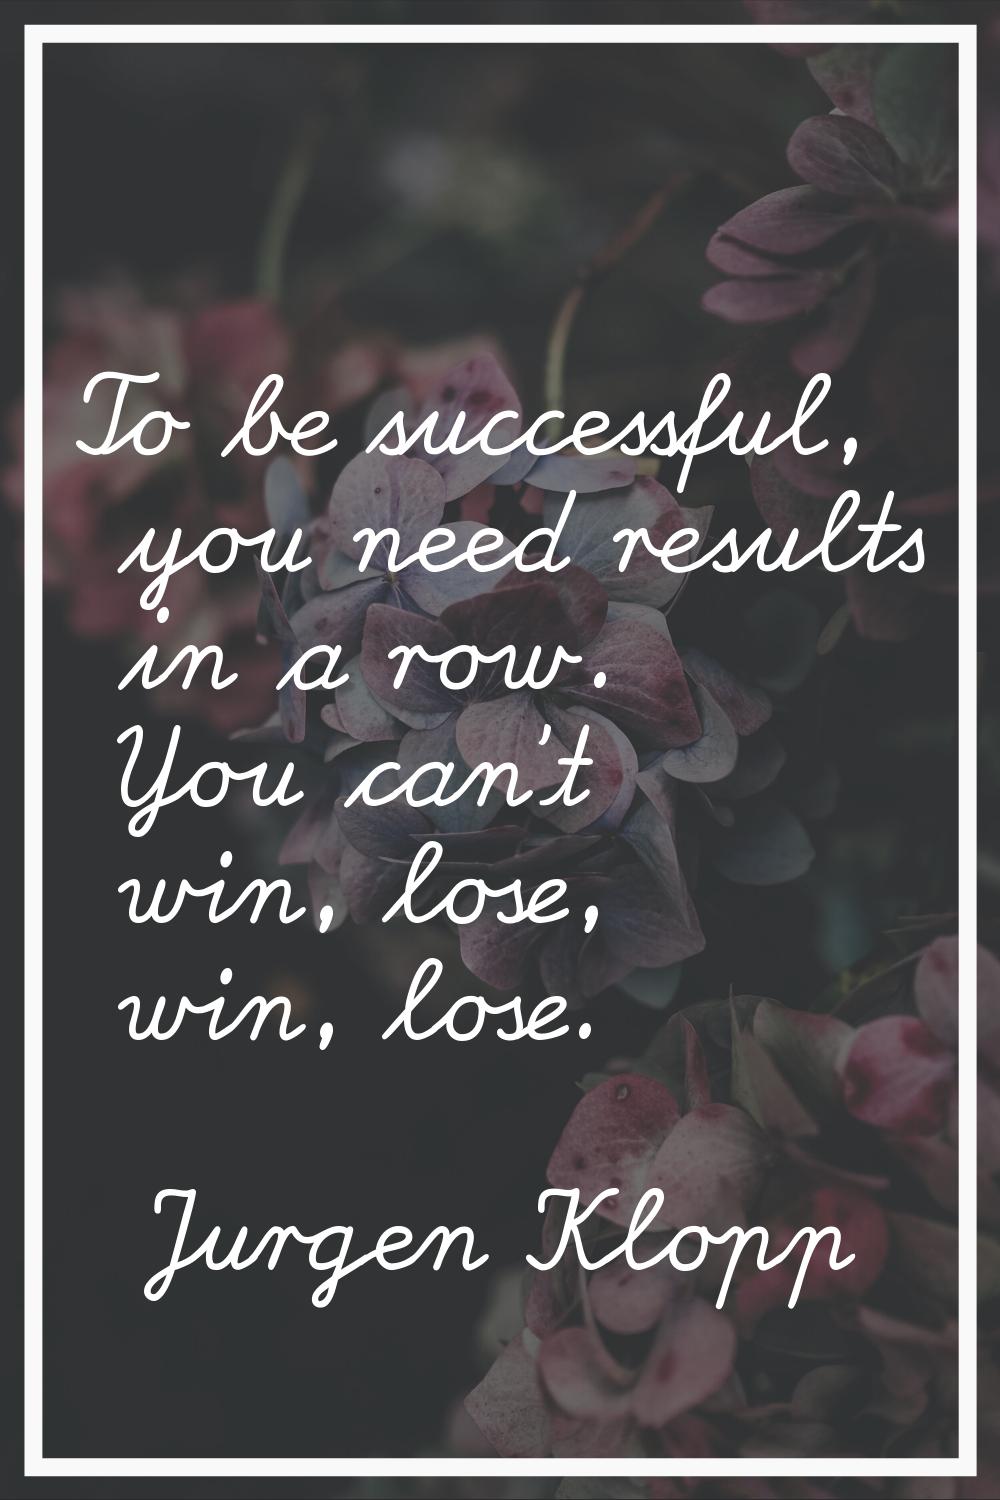 To be successful, you need results in a row. You can't win, lose, win, lose.